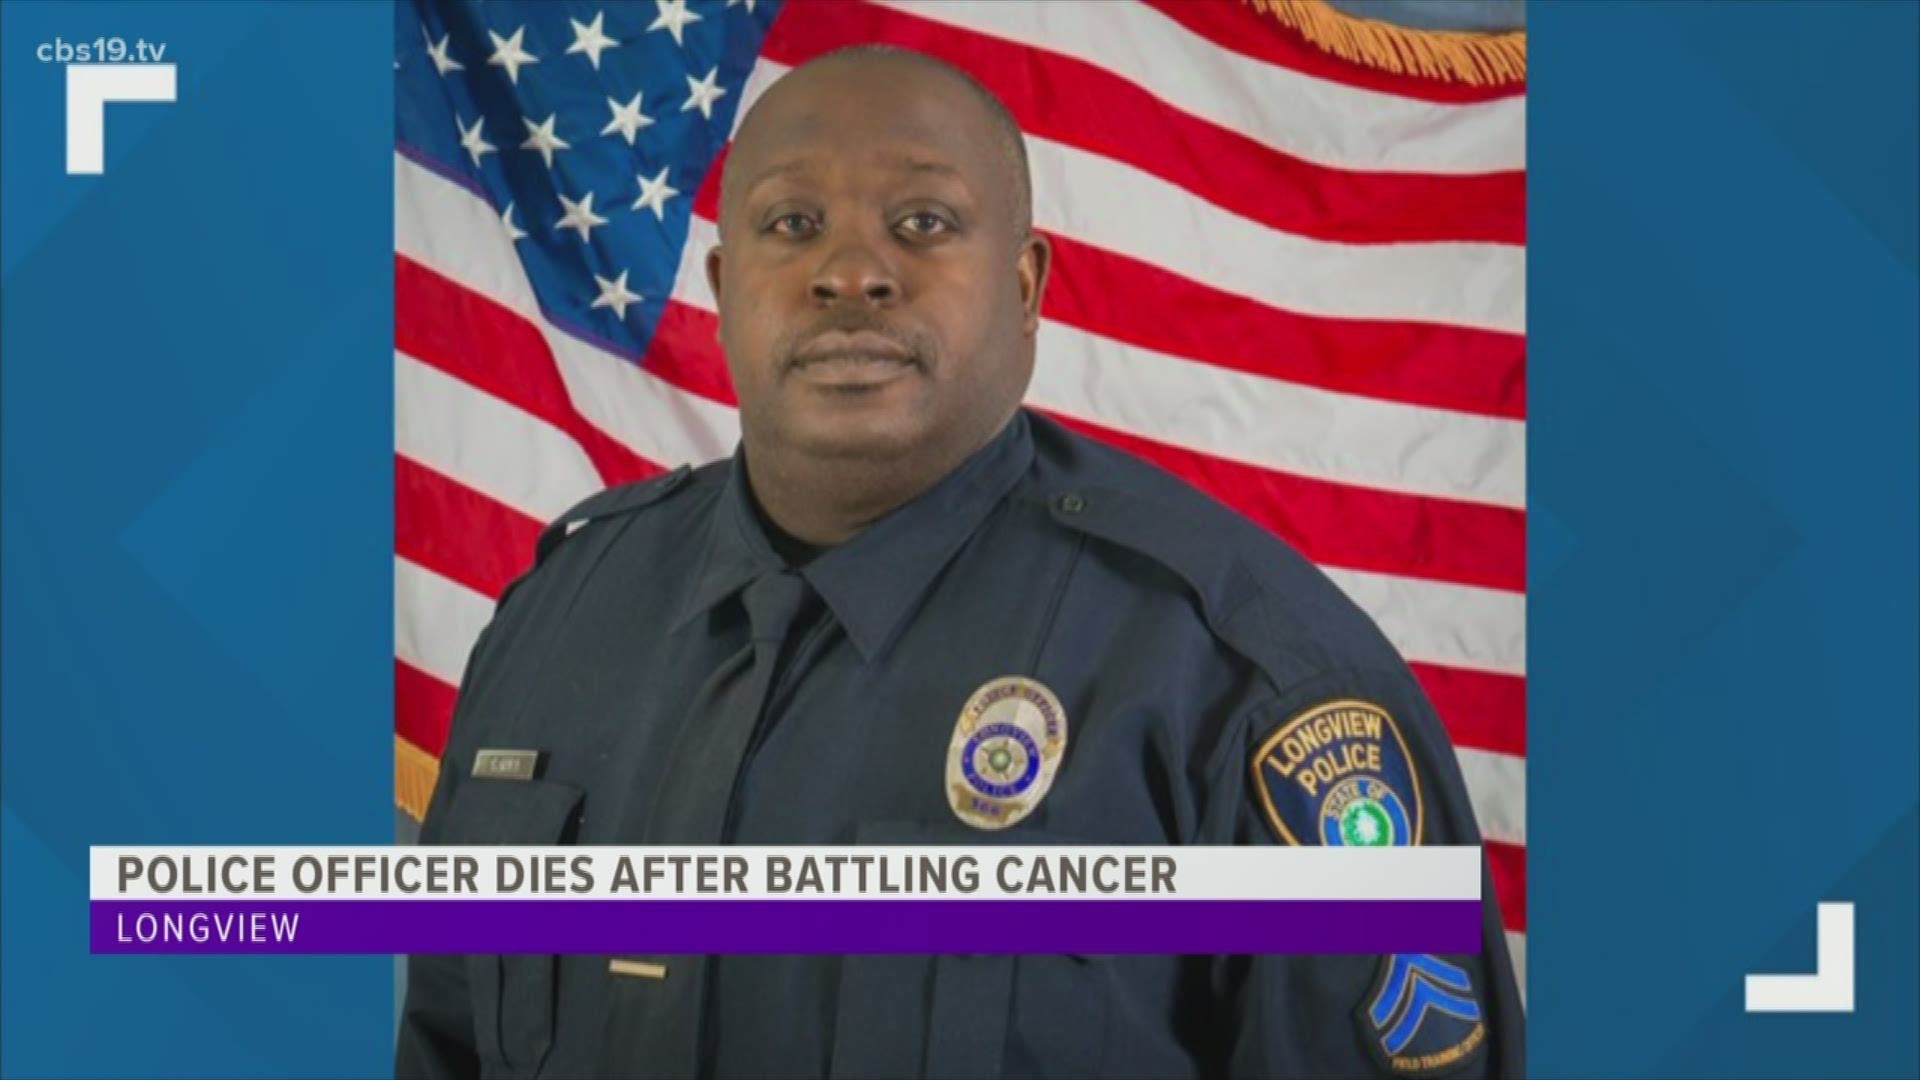 The officer died after a long bout with cancer.